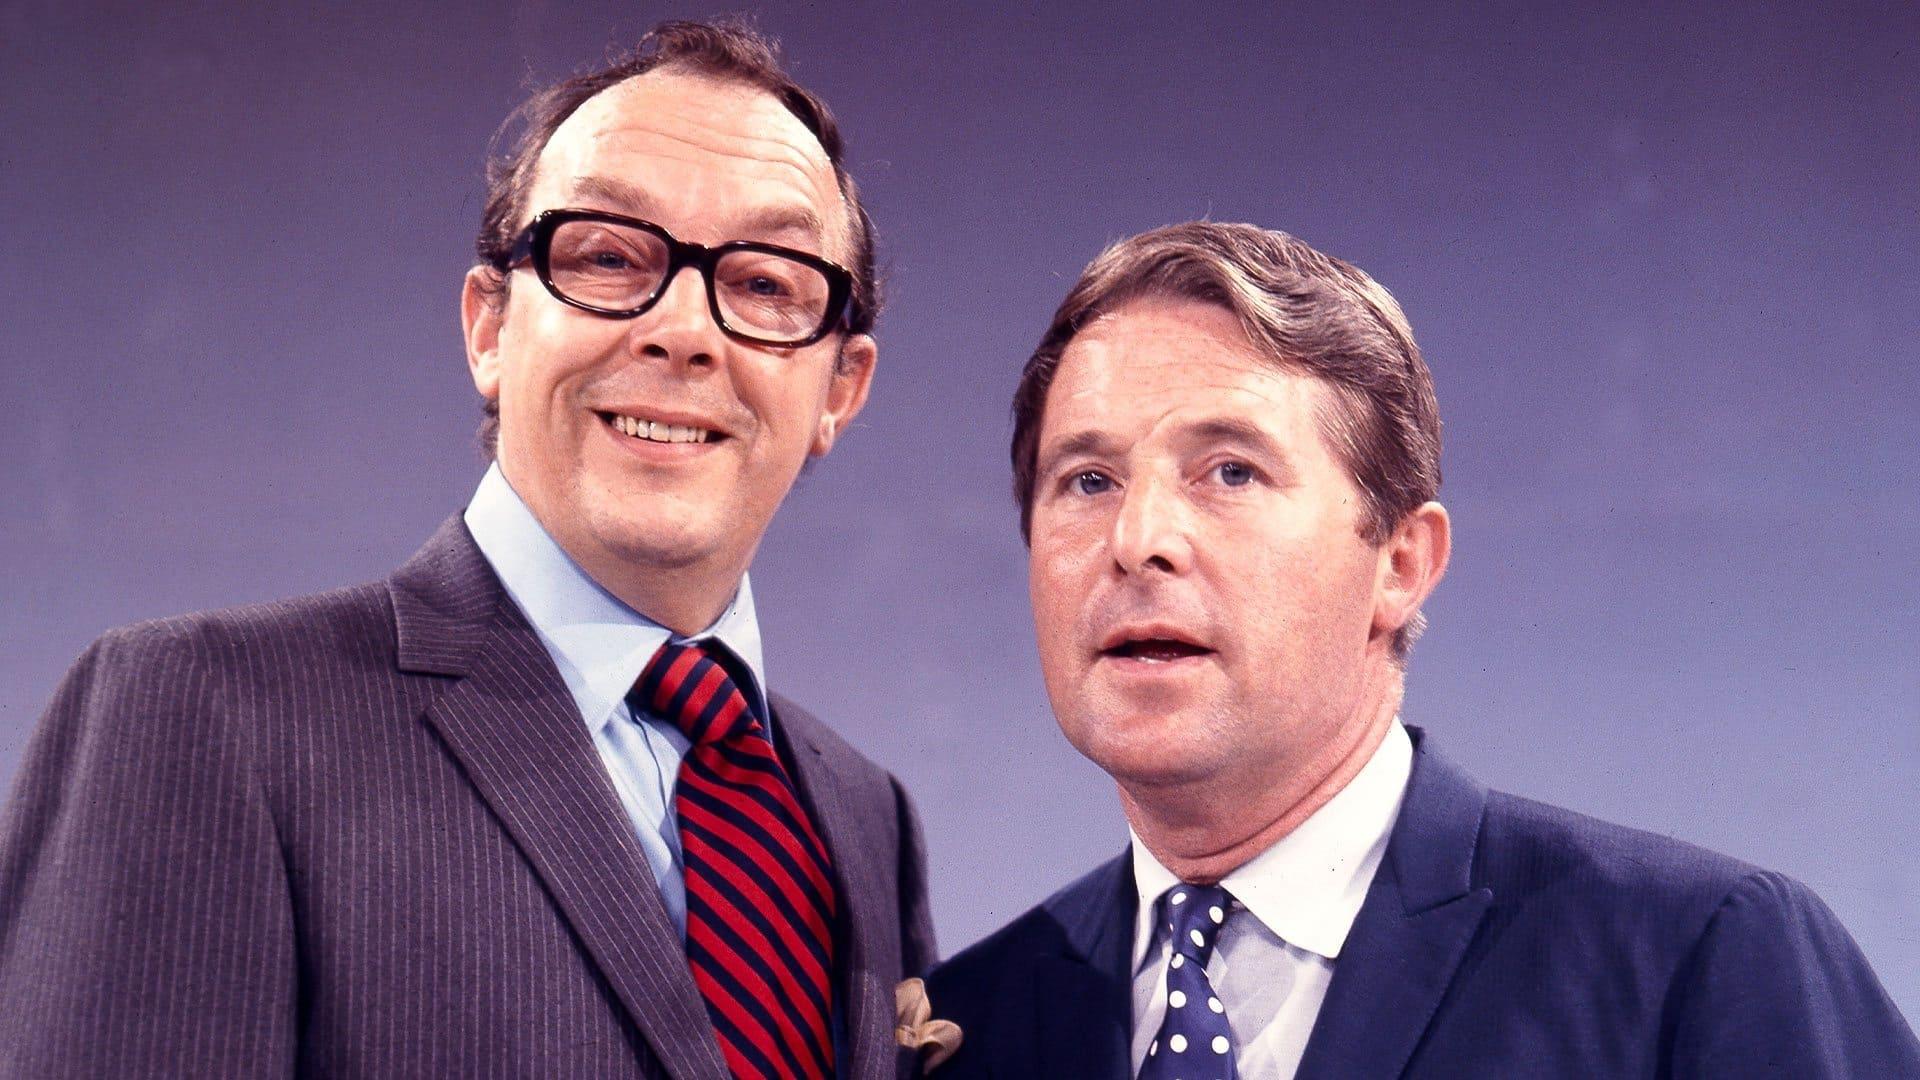 Morecambe & Wise: In Their Own Words backdrop